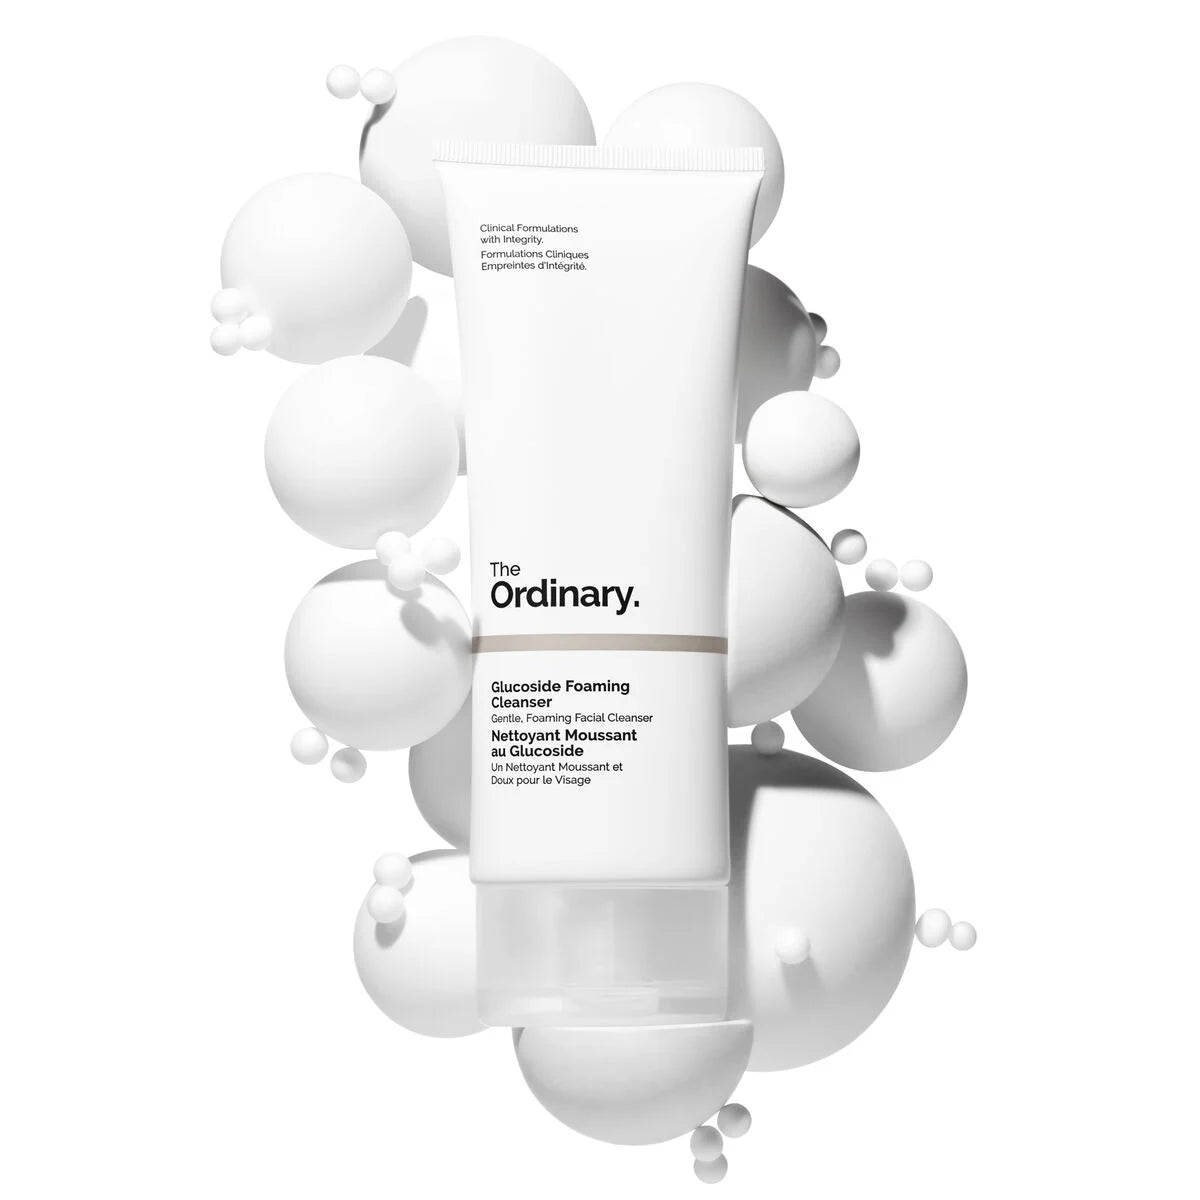 The Ordinary Glucoside Foaming Cleanser